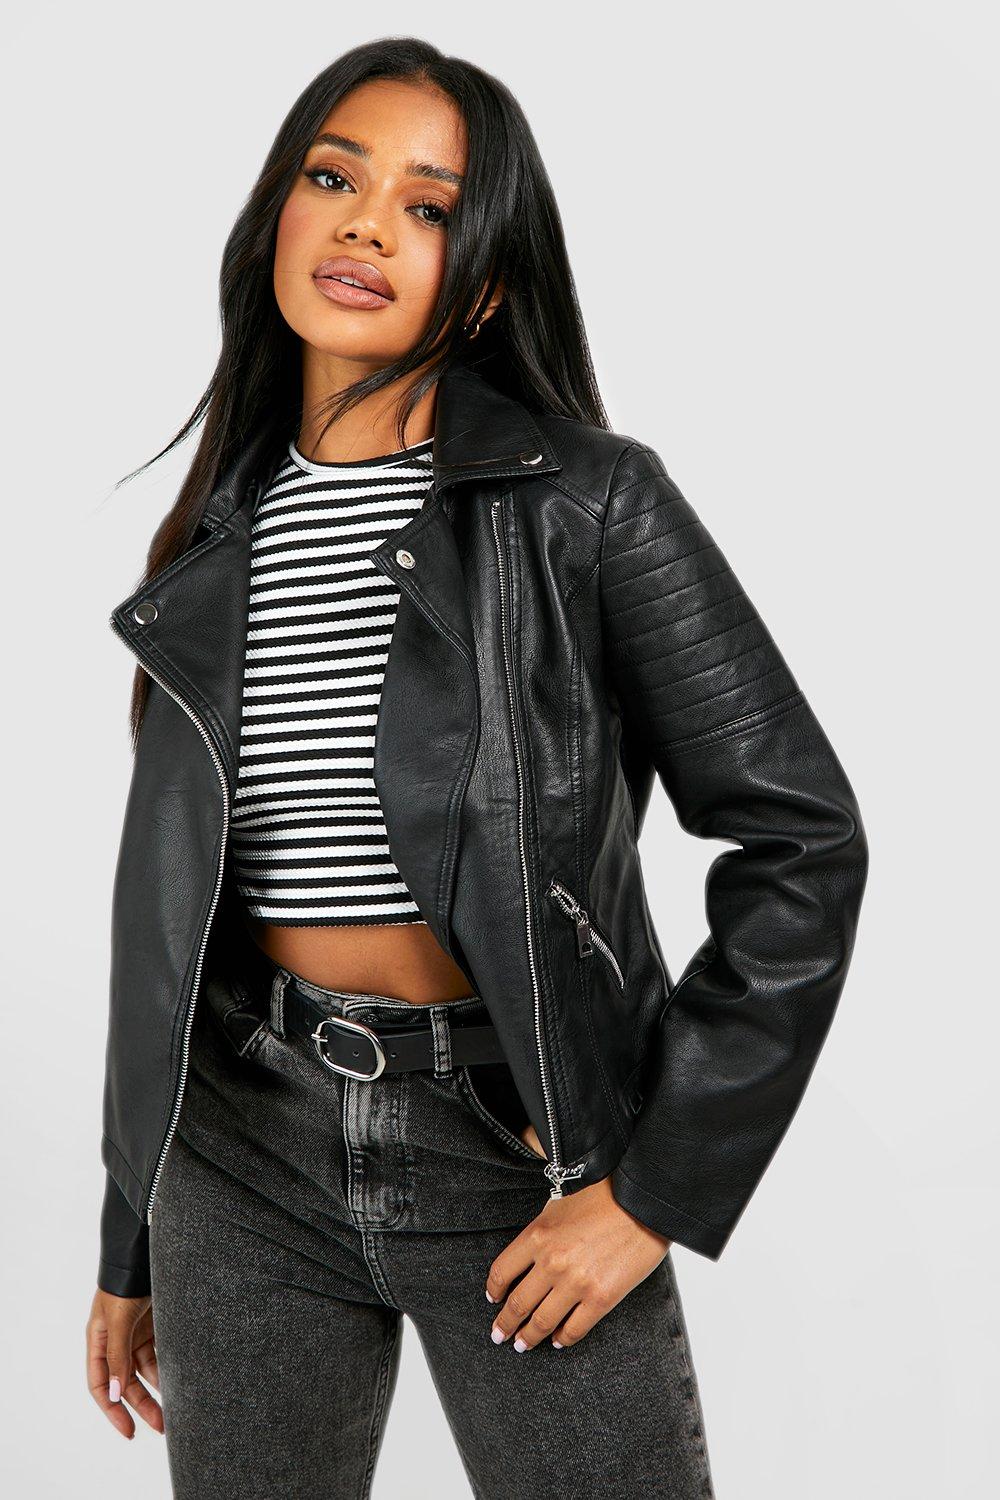 Black Leather Motorcycle Jacket Stock Photo - Download Image Now